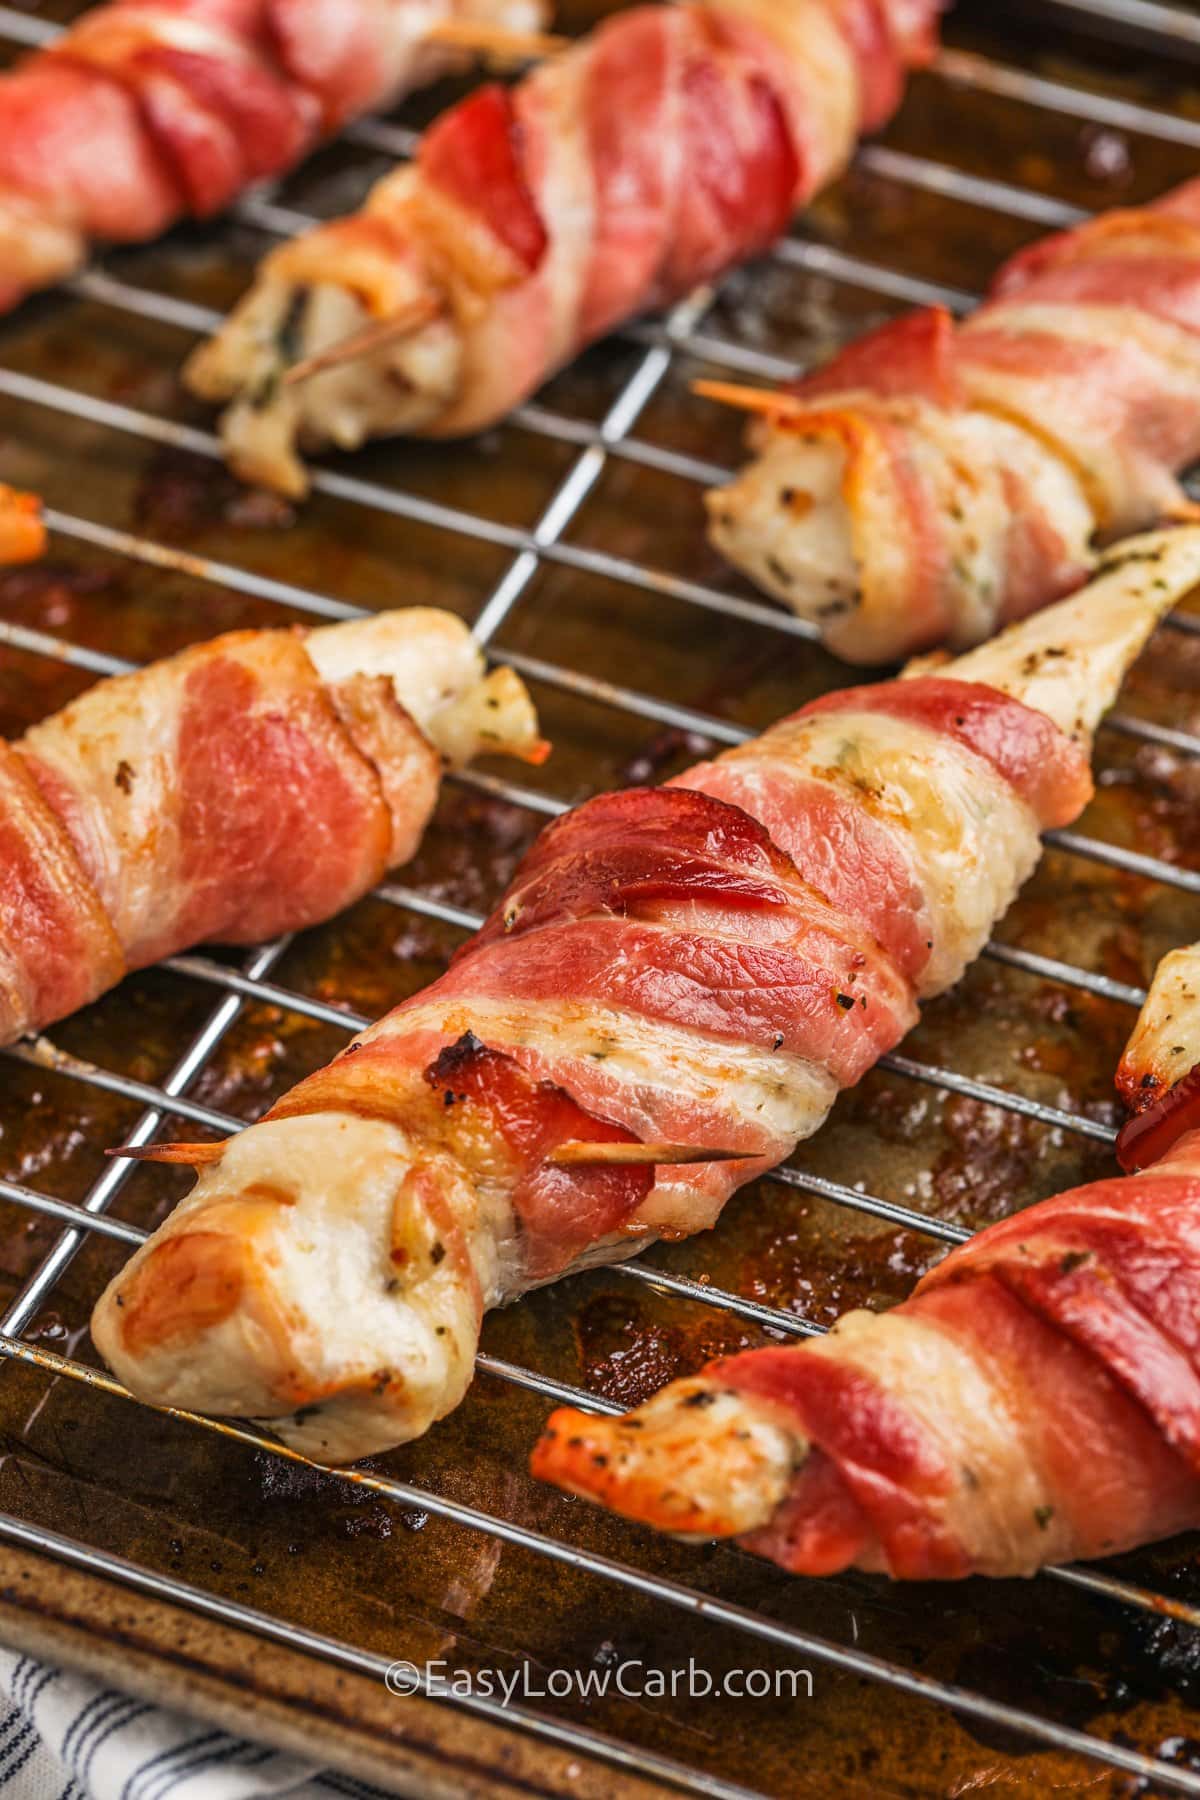 Bacon wrapped chicken cooked on a baking tray